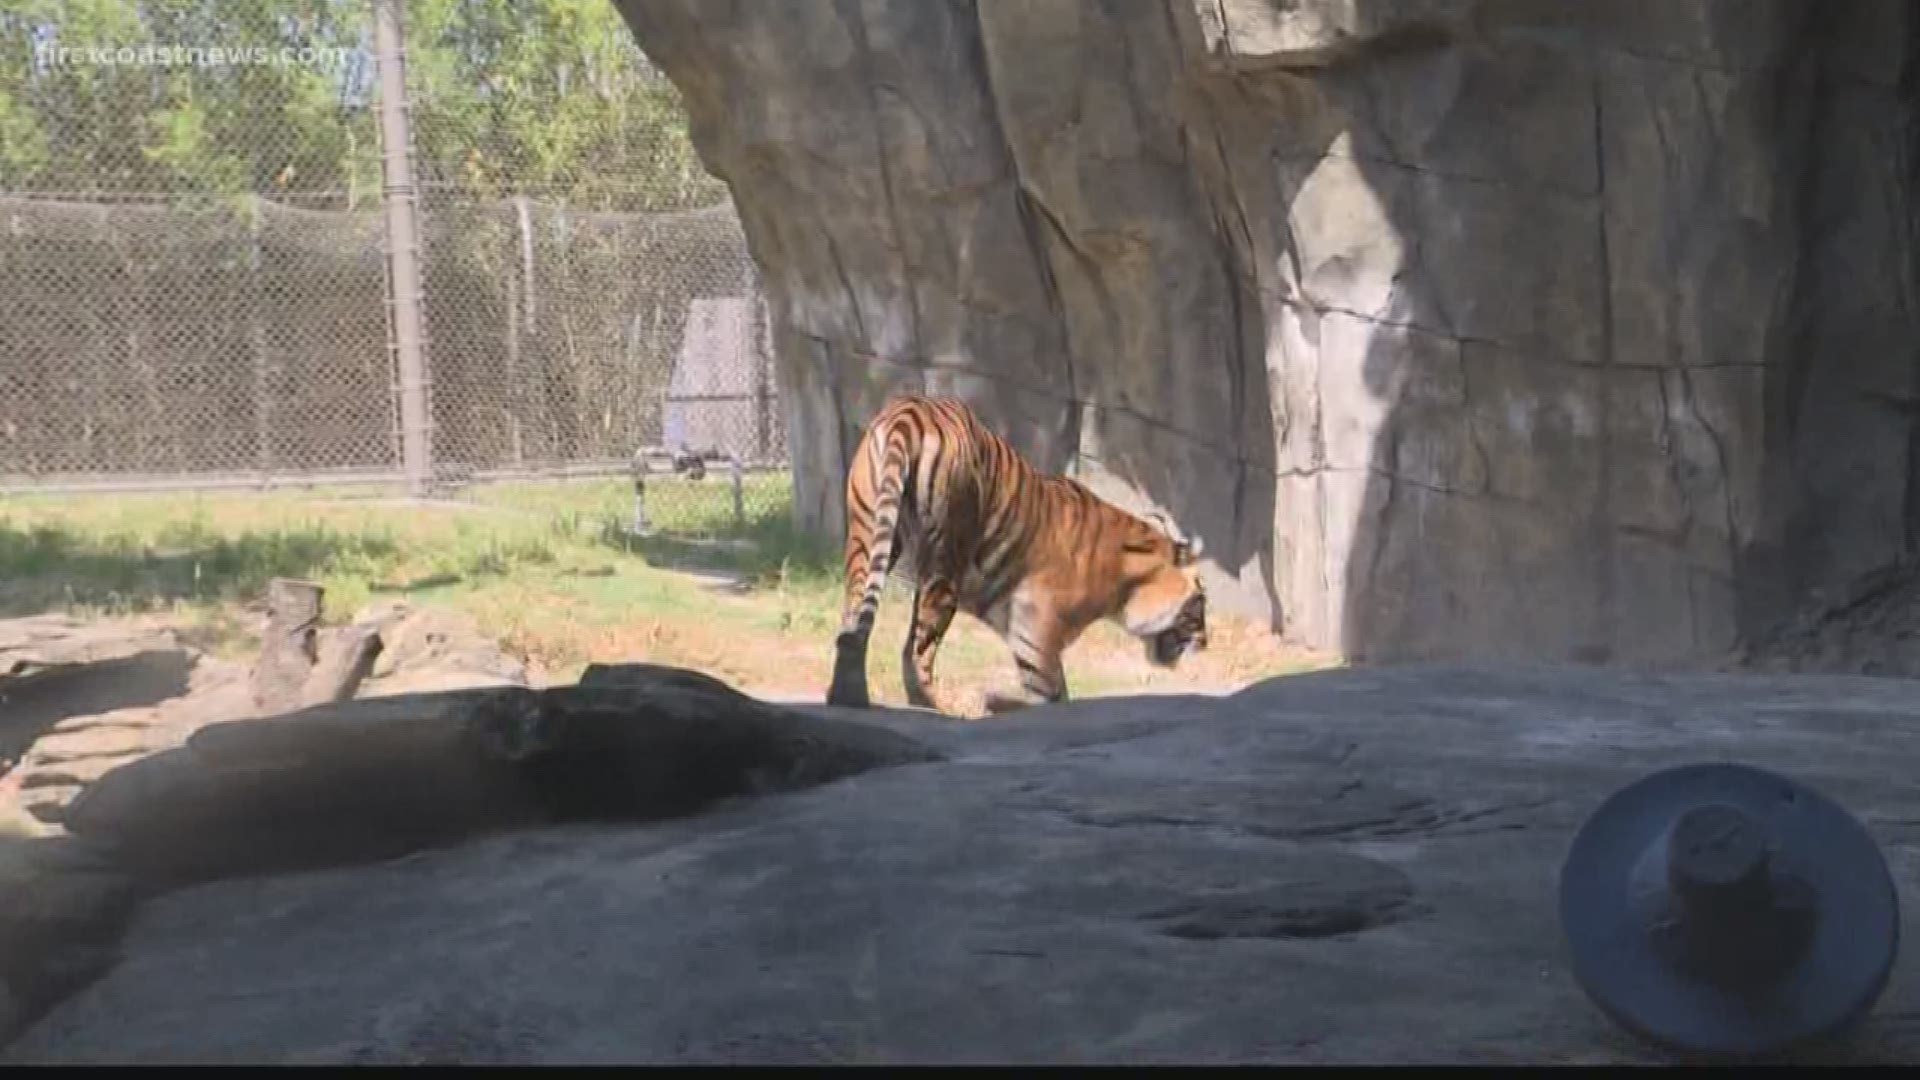 Jacksonville Zoo river dock's lack of access hurting business